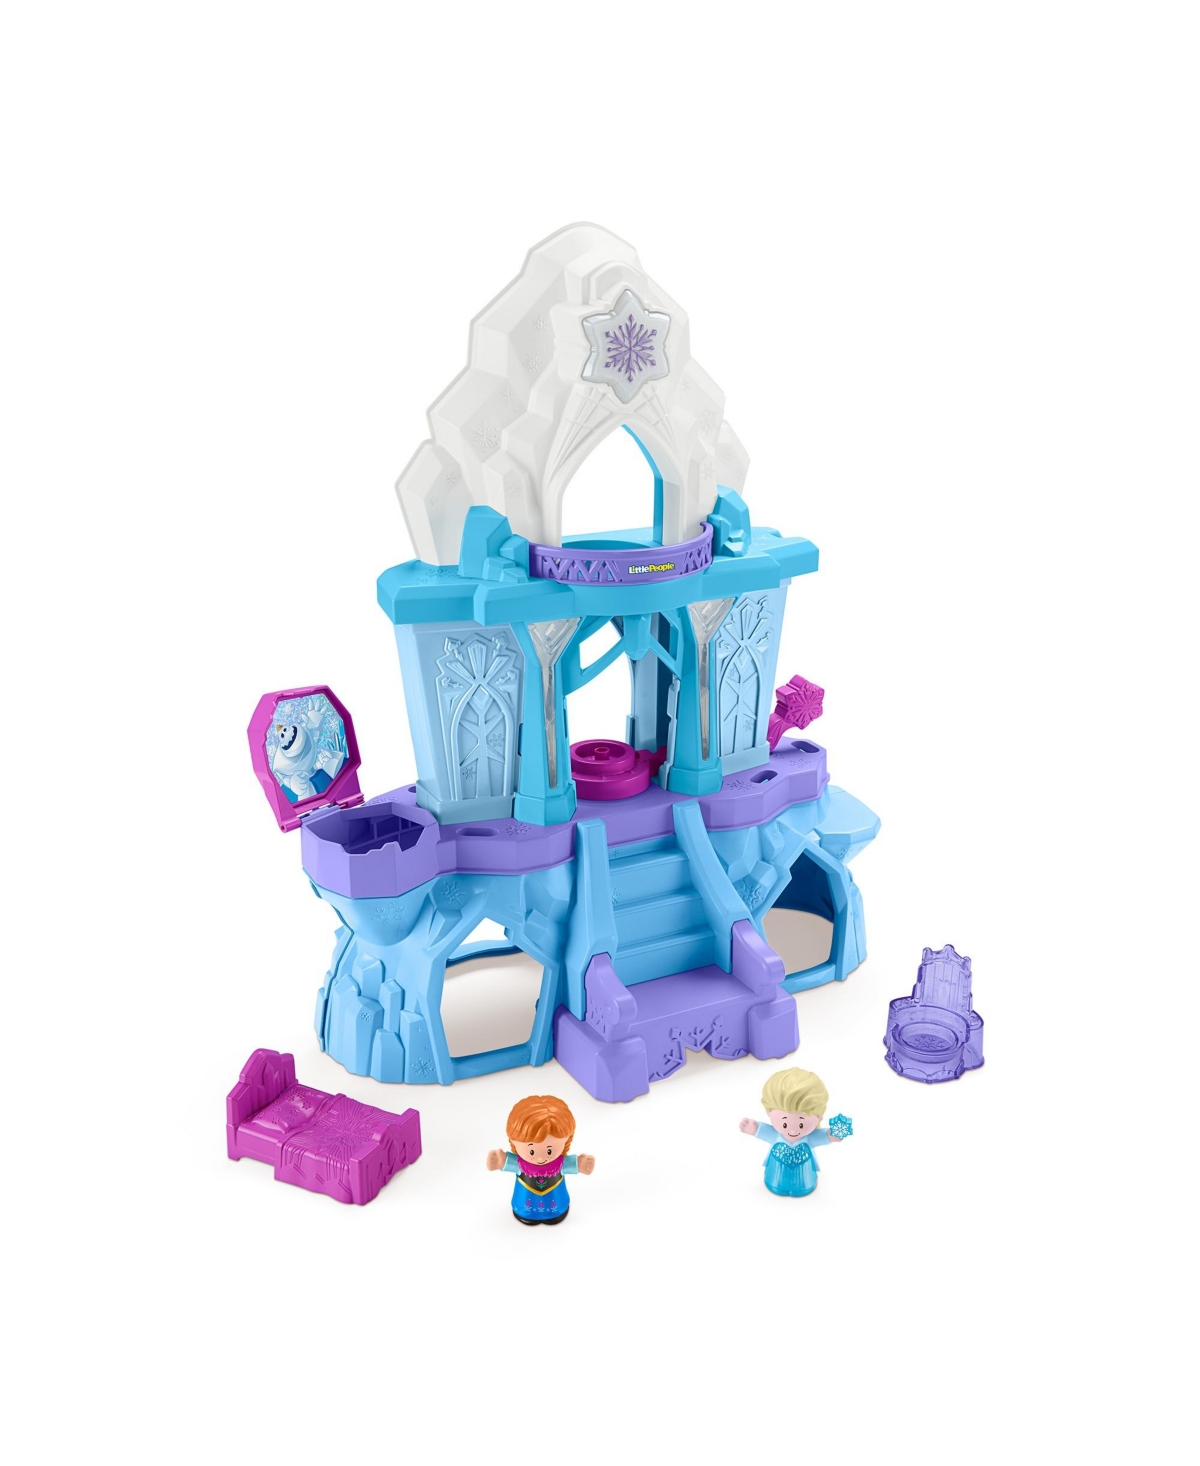 Fisher Price Kids' Disney Frozen Toy, Fisher-price Little People Playset With Anna & Elsa Figures, Elsa's Enchanted Lig In Multi